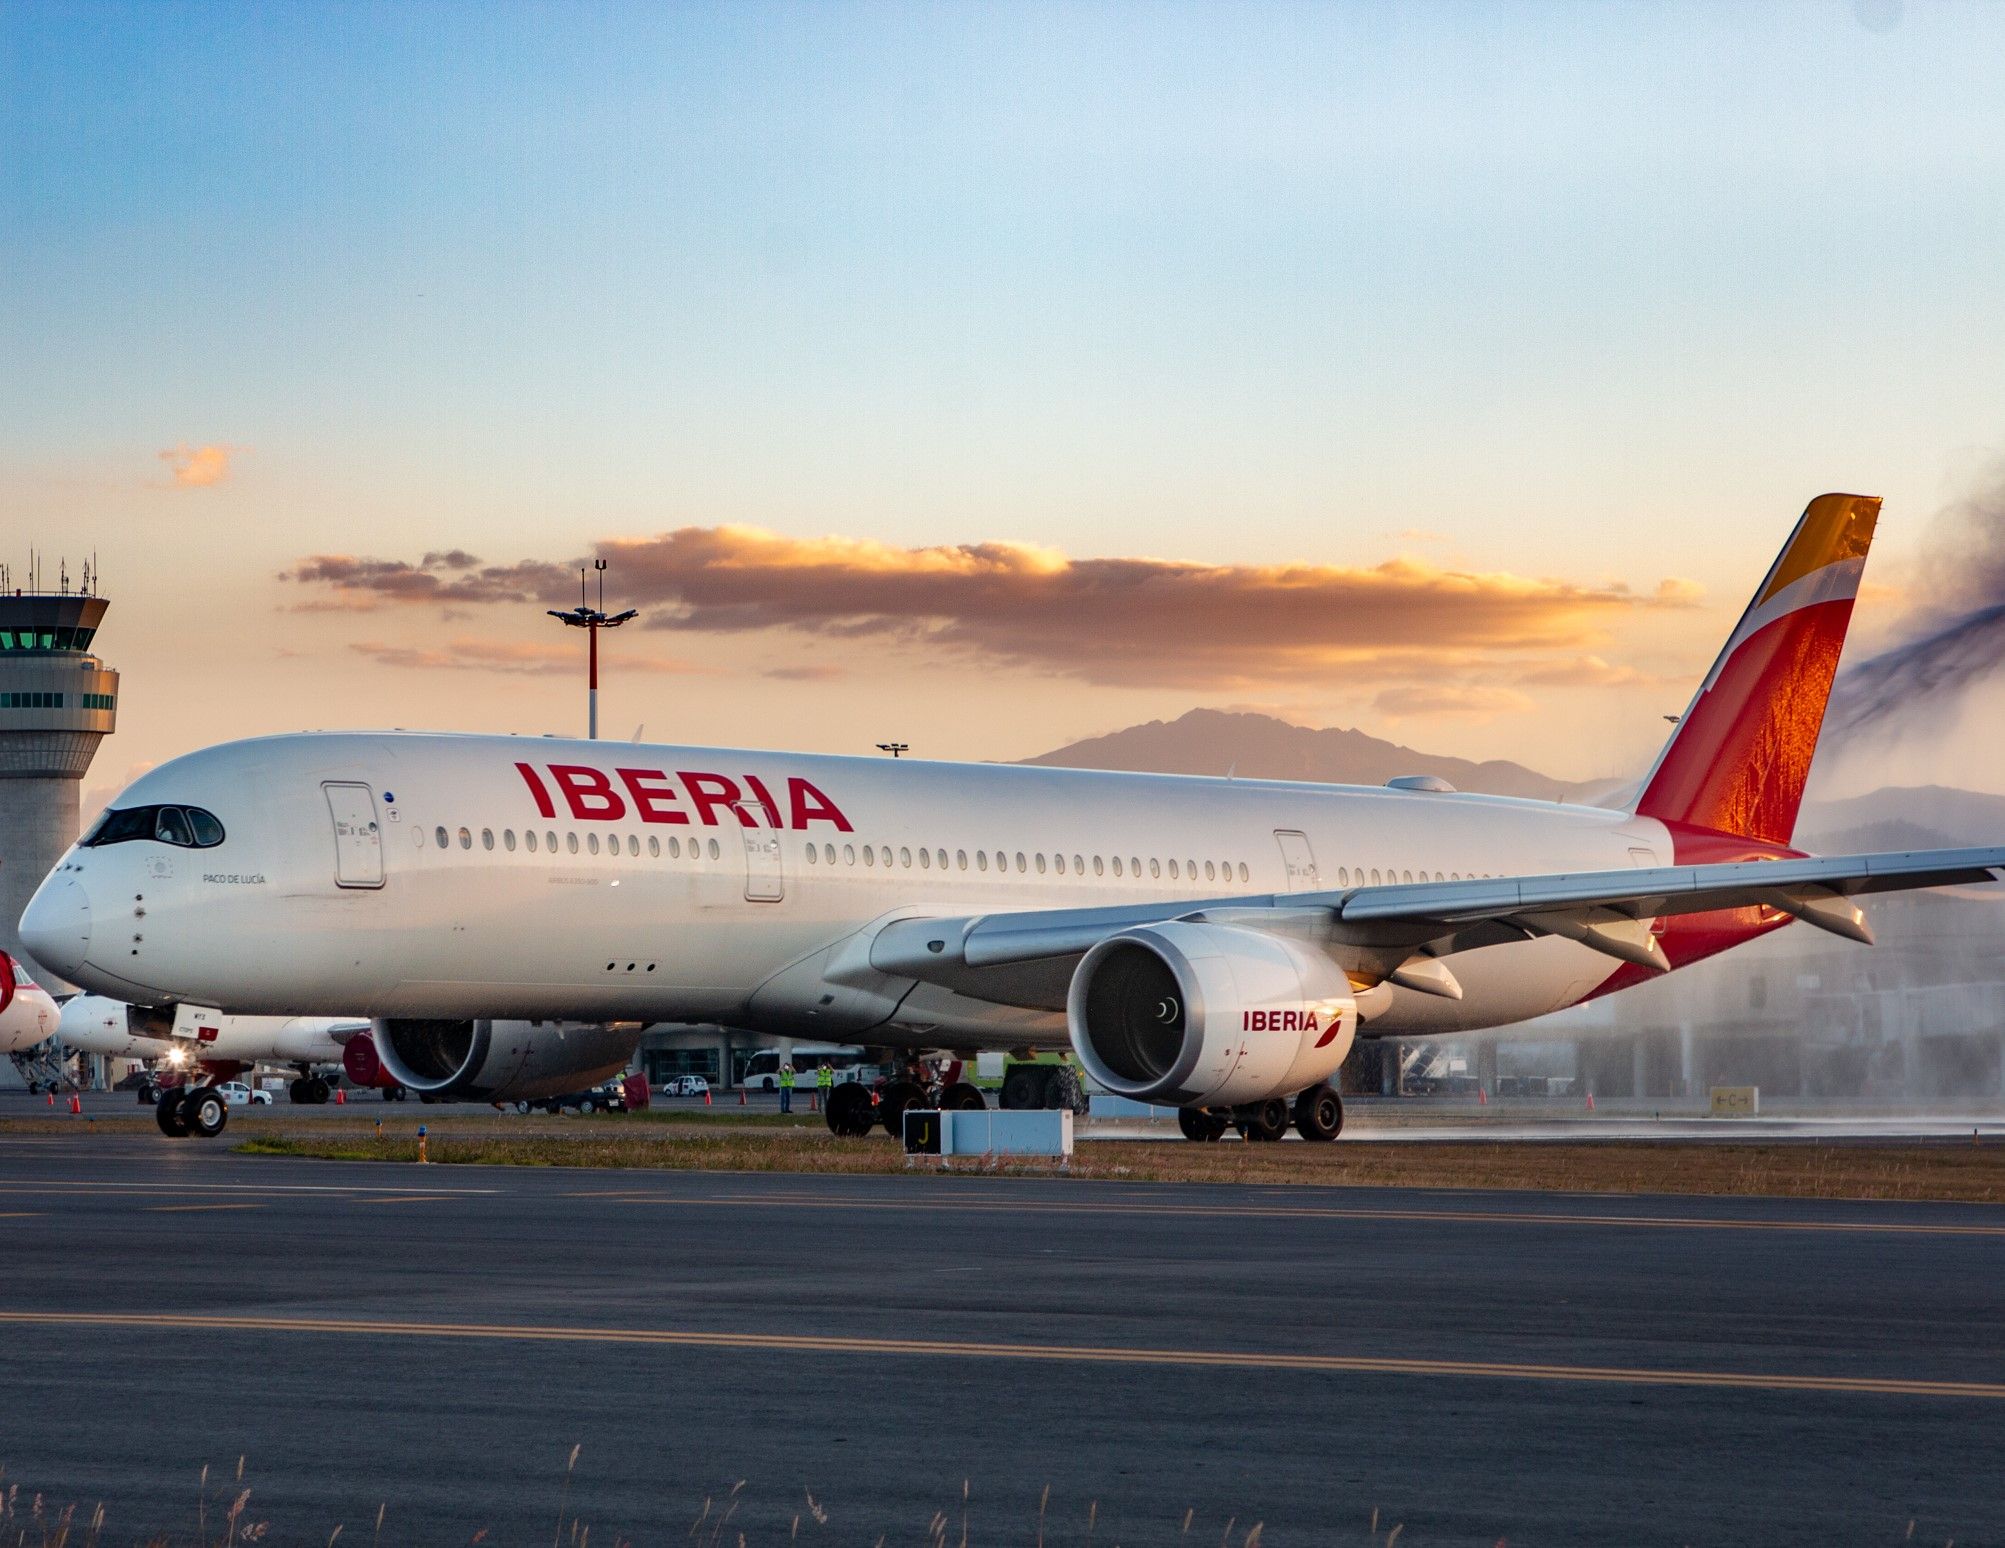 Iberia Airbus A350-900 on the tarmac after being sprayed with water.